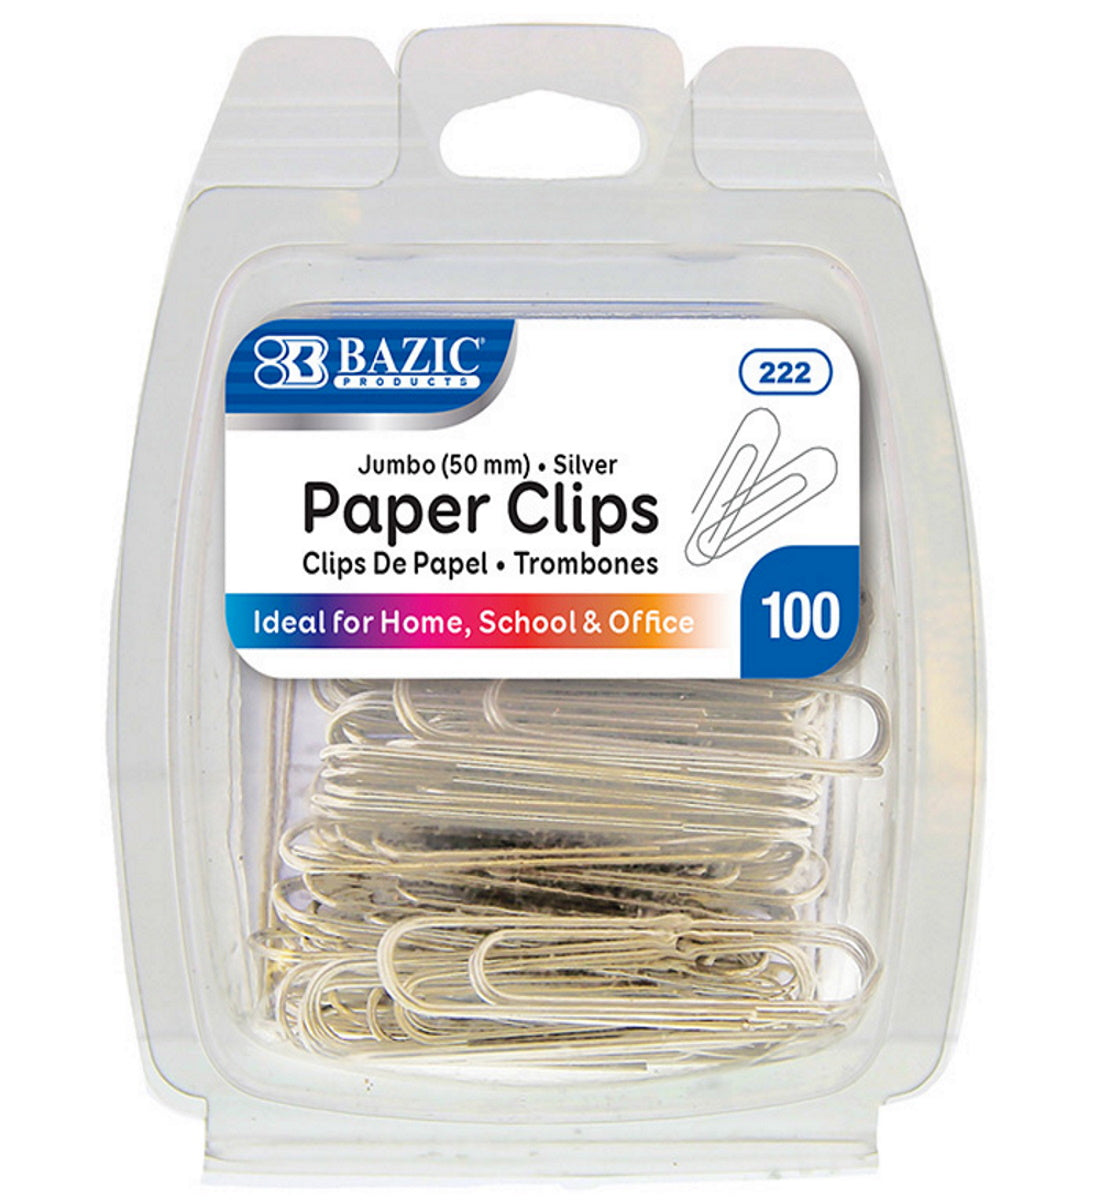 BAZIC 100 Large Jumbo Paper Clips (50mm) Silver Smooth Finish Craft Ho –